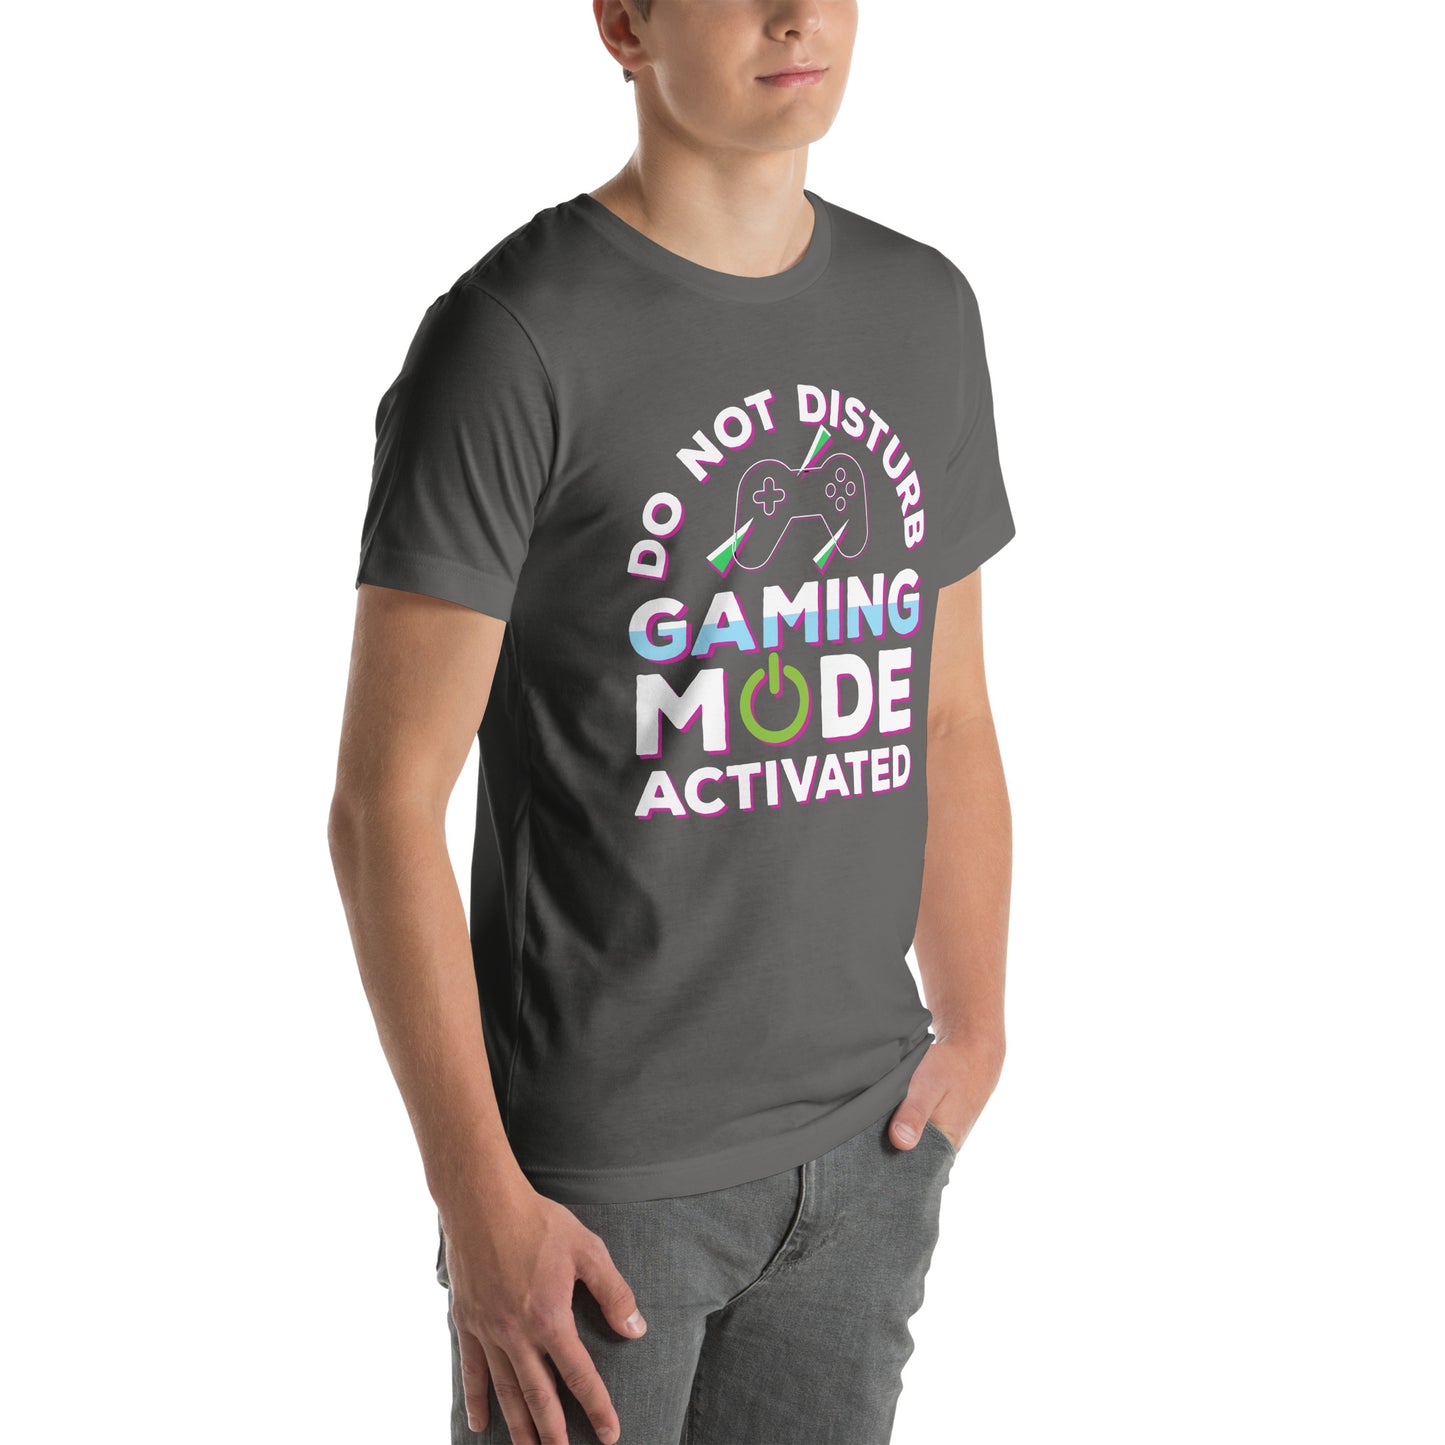 Do Not Disturb, Gaming Mode Activated | Unisex Casual Tee | Funny Gamer Shirt